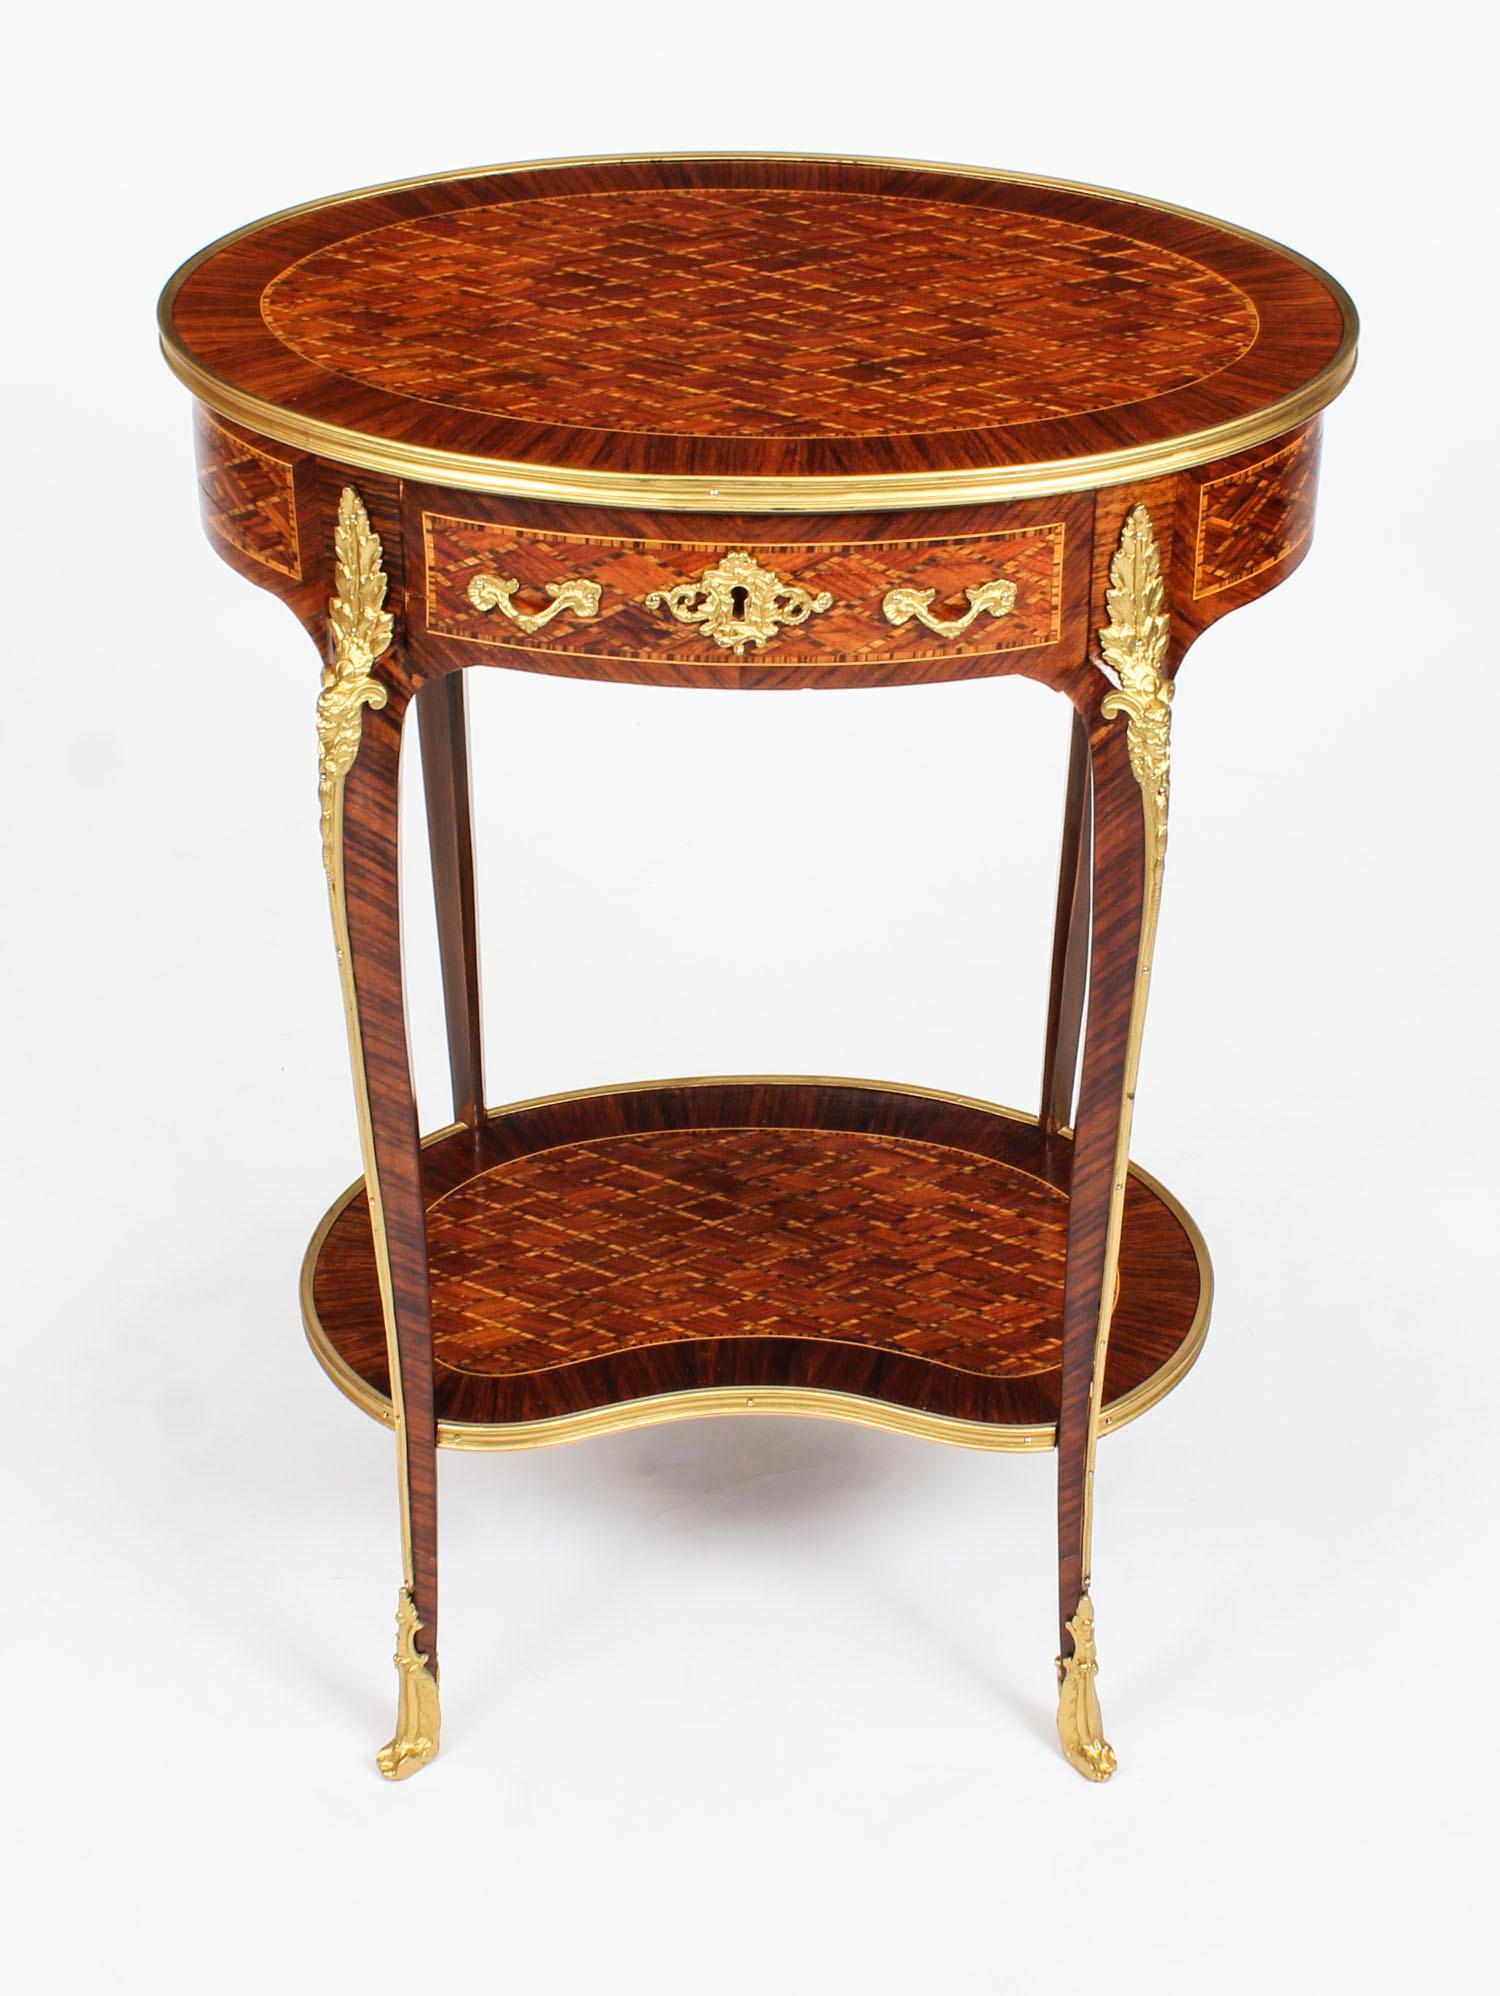 This is a beautiful pair of antique French Louis Revival parquetry occasional tables, late 19th century in date.

The gilt-bronze banded oval table tops are beautifully inlaid with diamond-shaped parquetry above a frieze with a single drawer. The